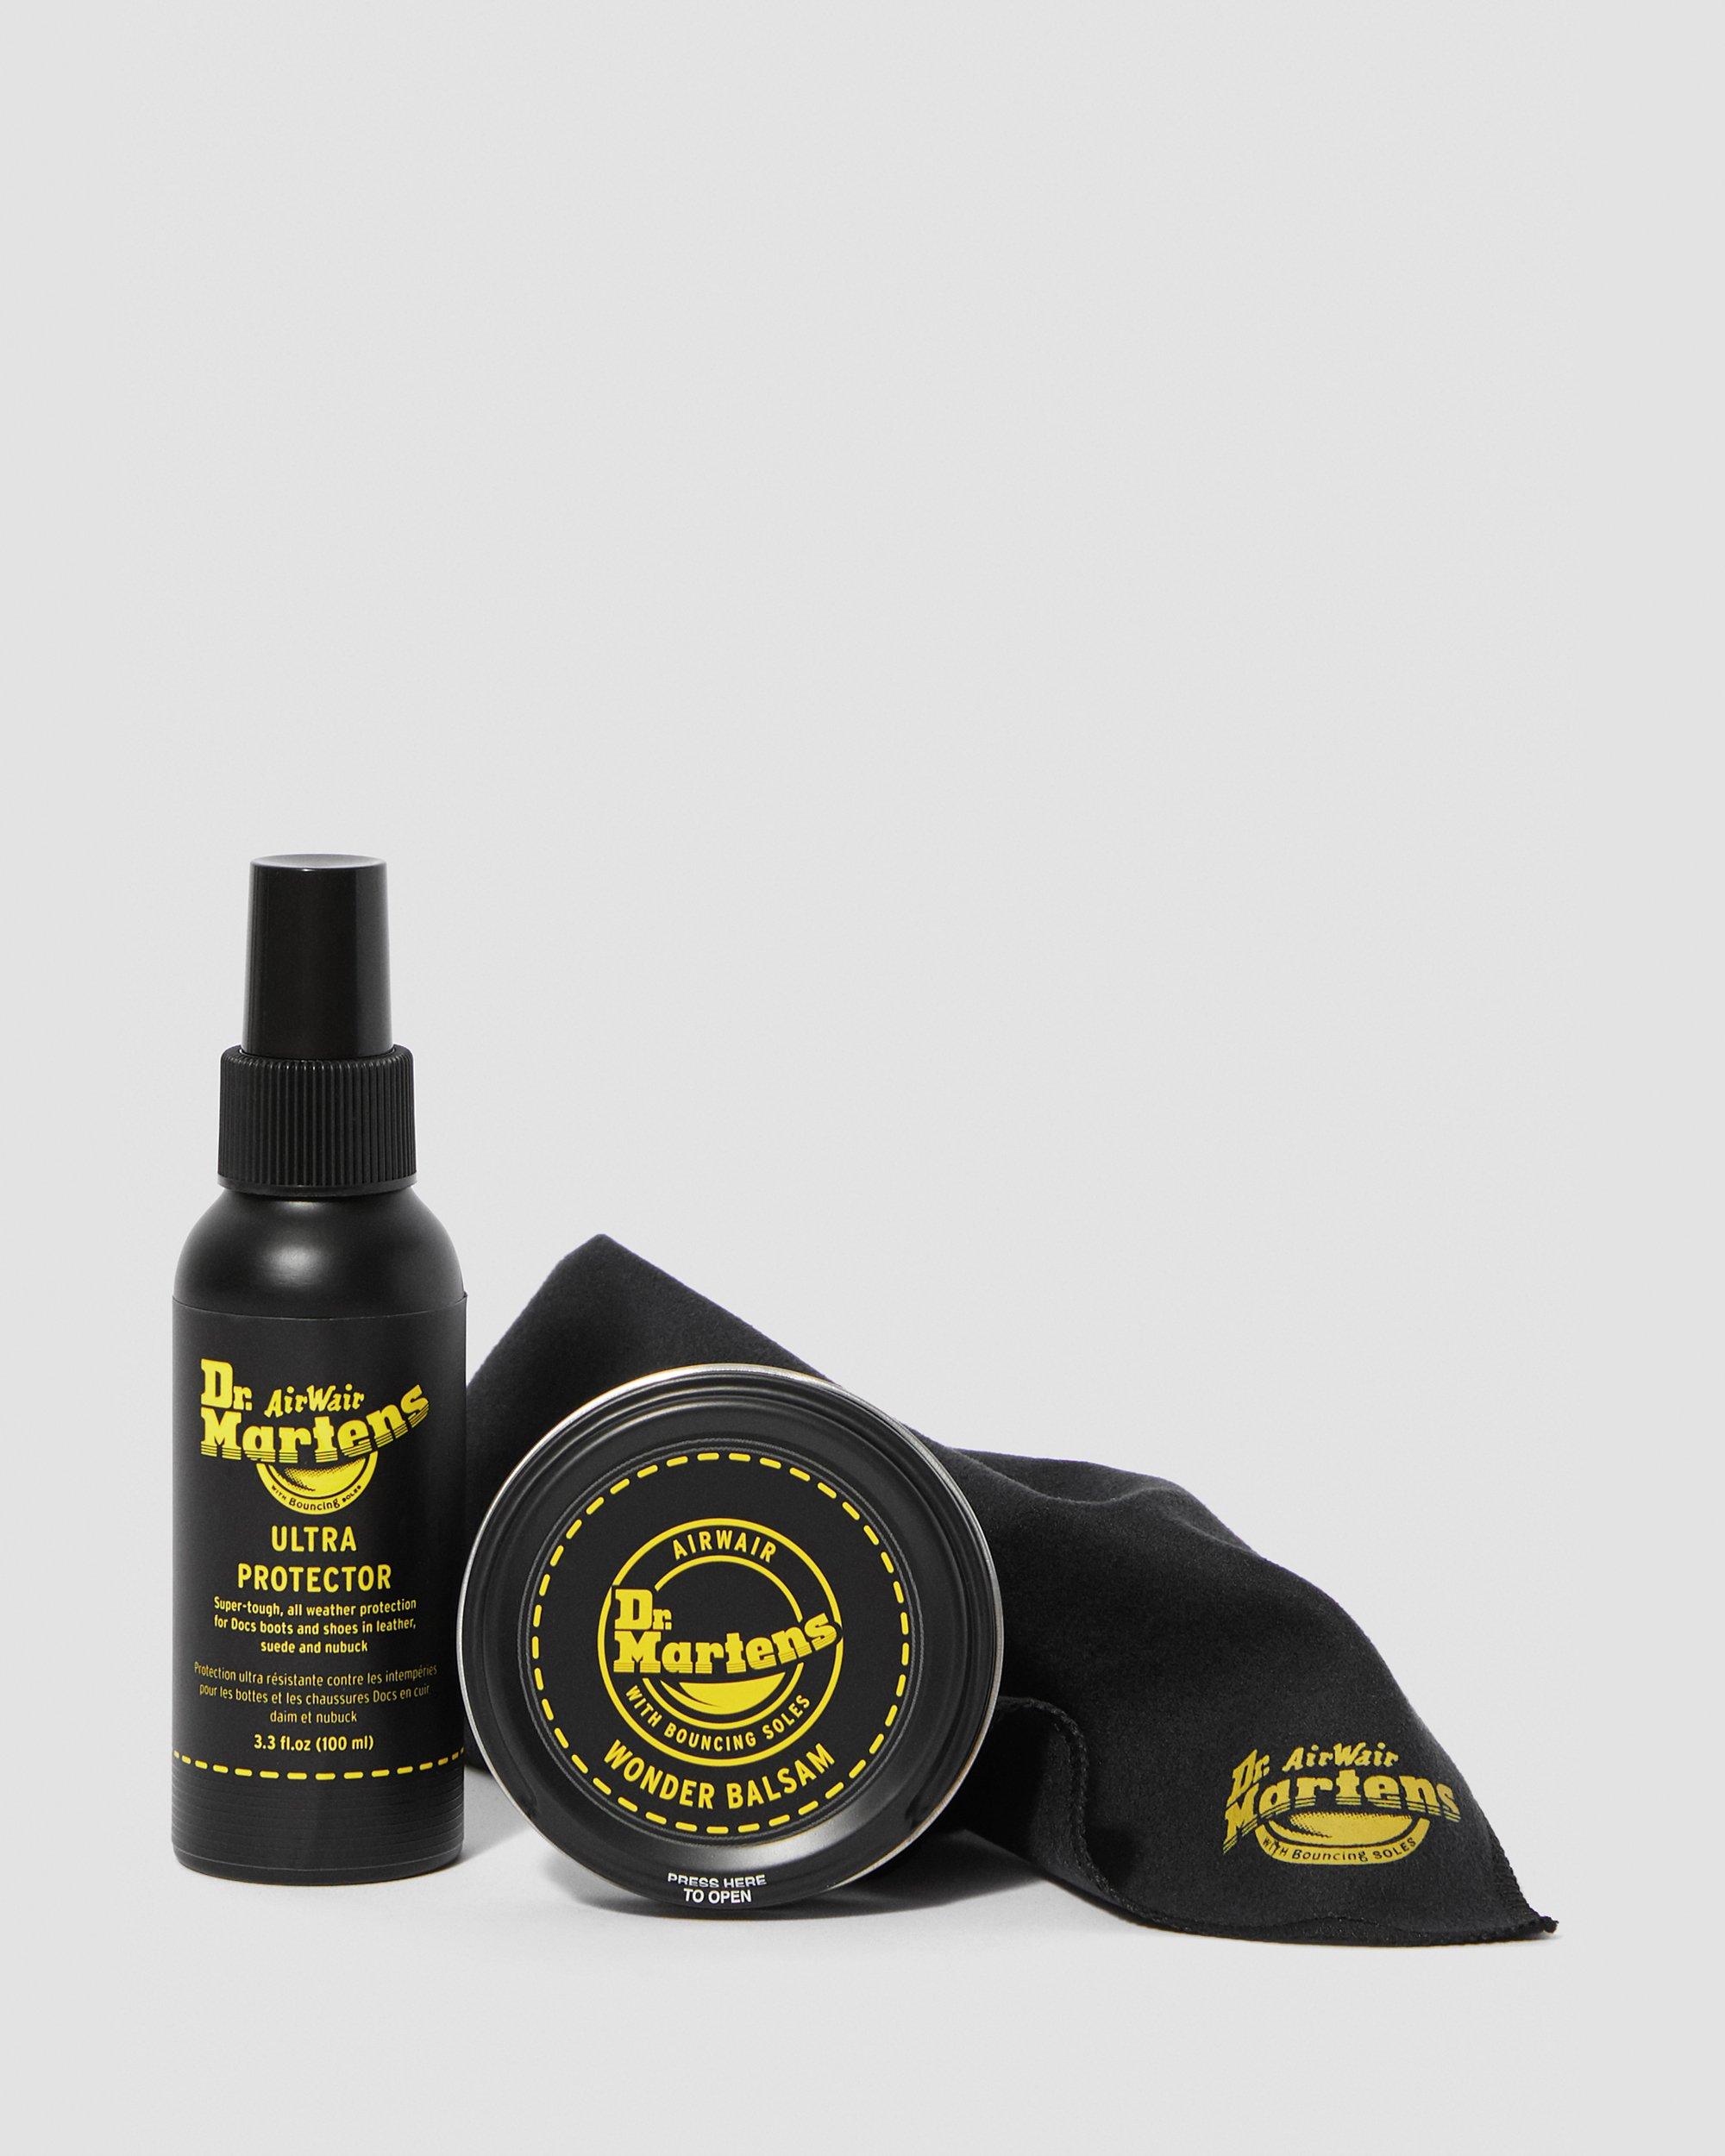 dr martens cleaning kit